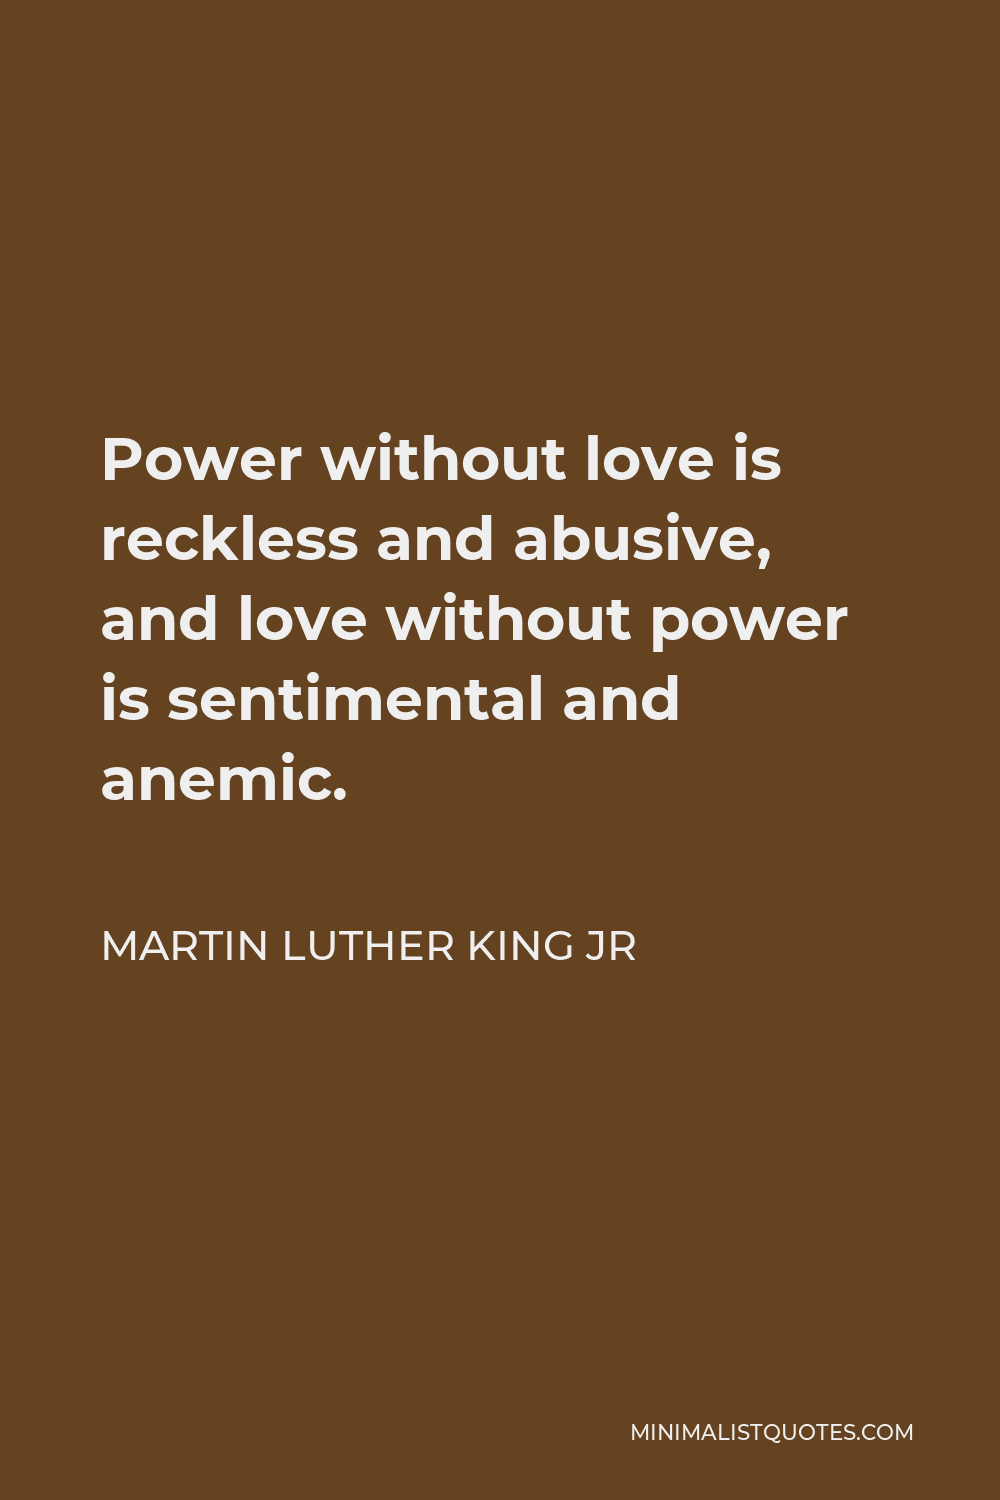 Martin Luther King Jr Quote - Power without love is reckless and abusive, and love without power is sentimental and anemic.